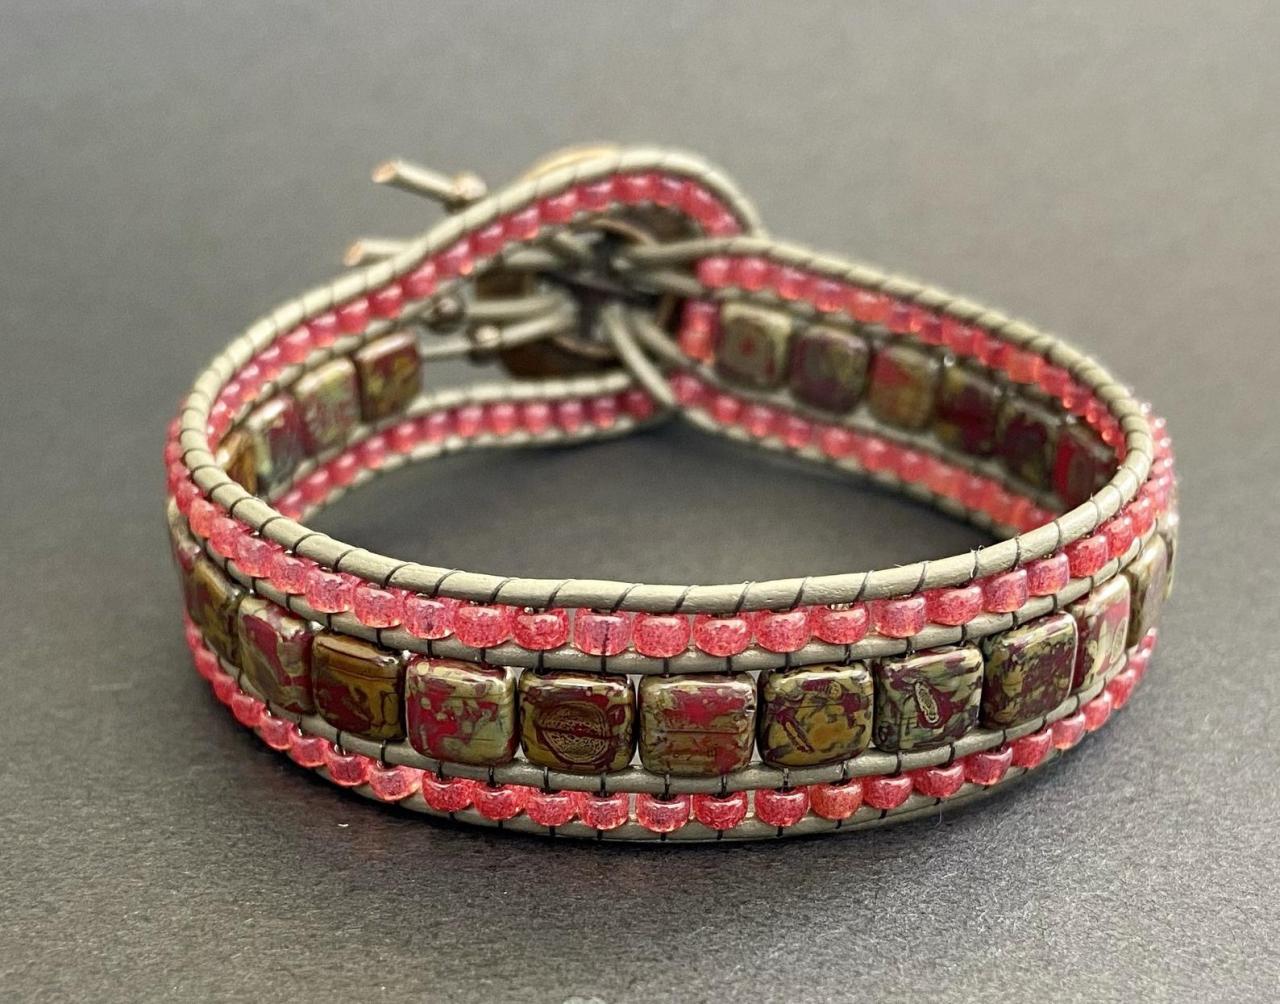 KIT Red Coral Pomegranate Bracelet Cuff Leather 2-Holed Tile Picasso DIY Complete Instructions